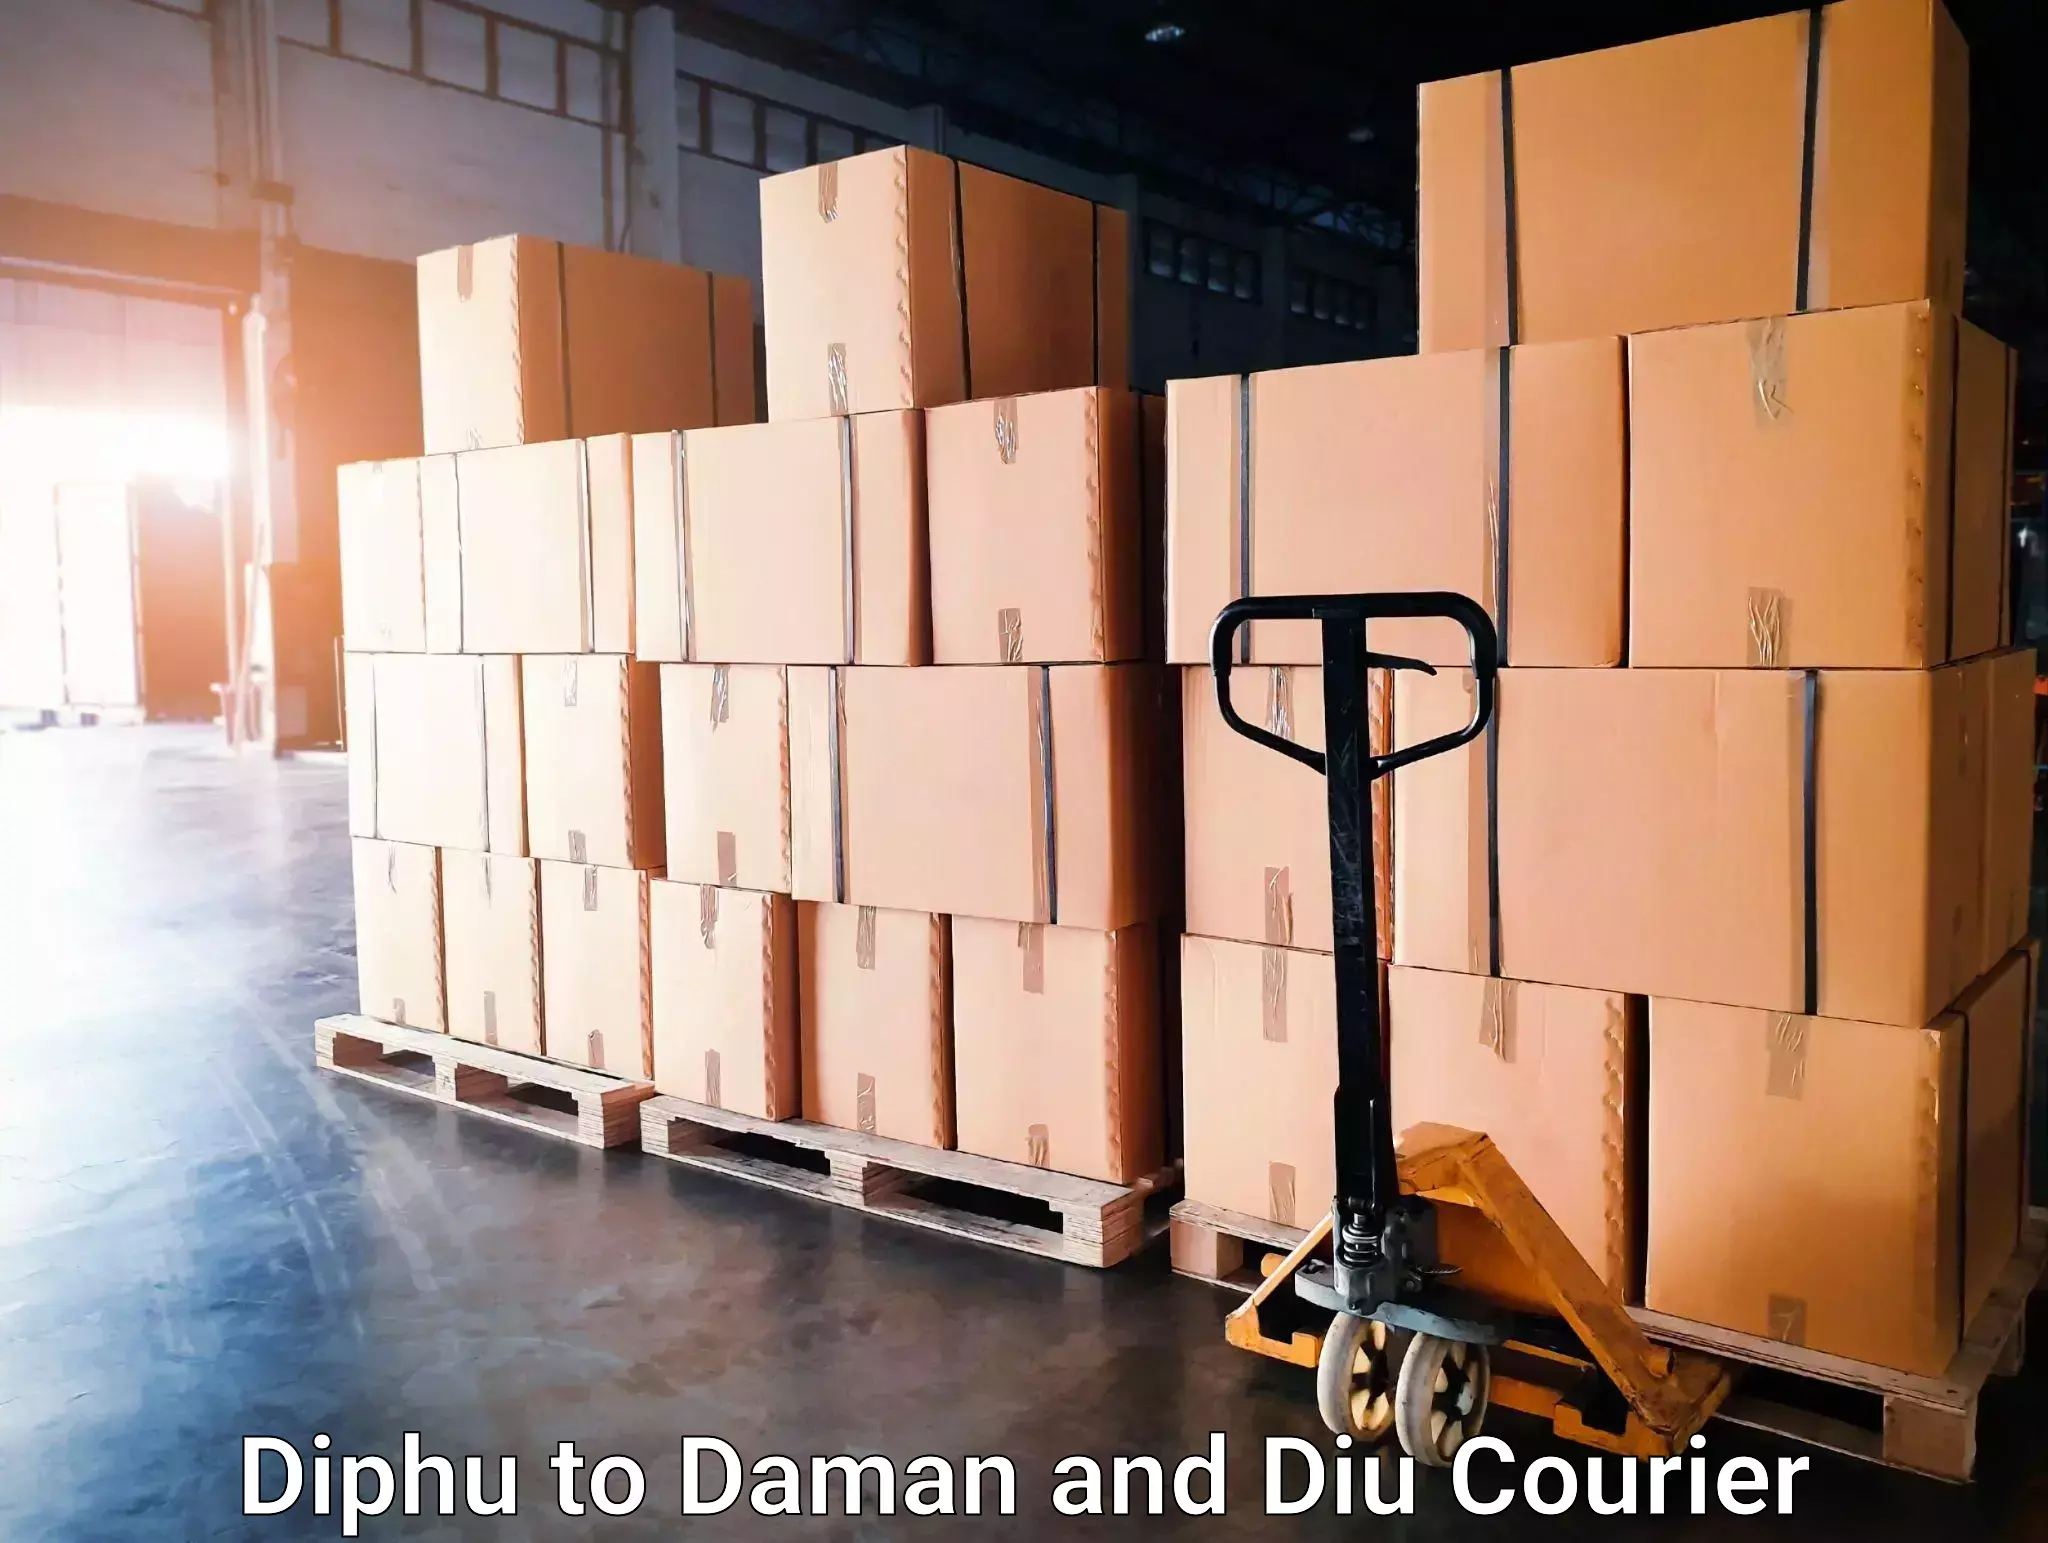 Express delivery network Diphu to Daman and Diu